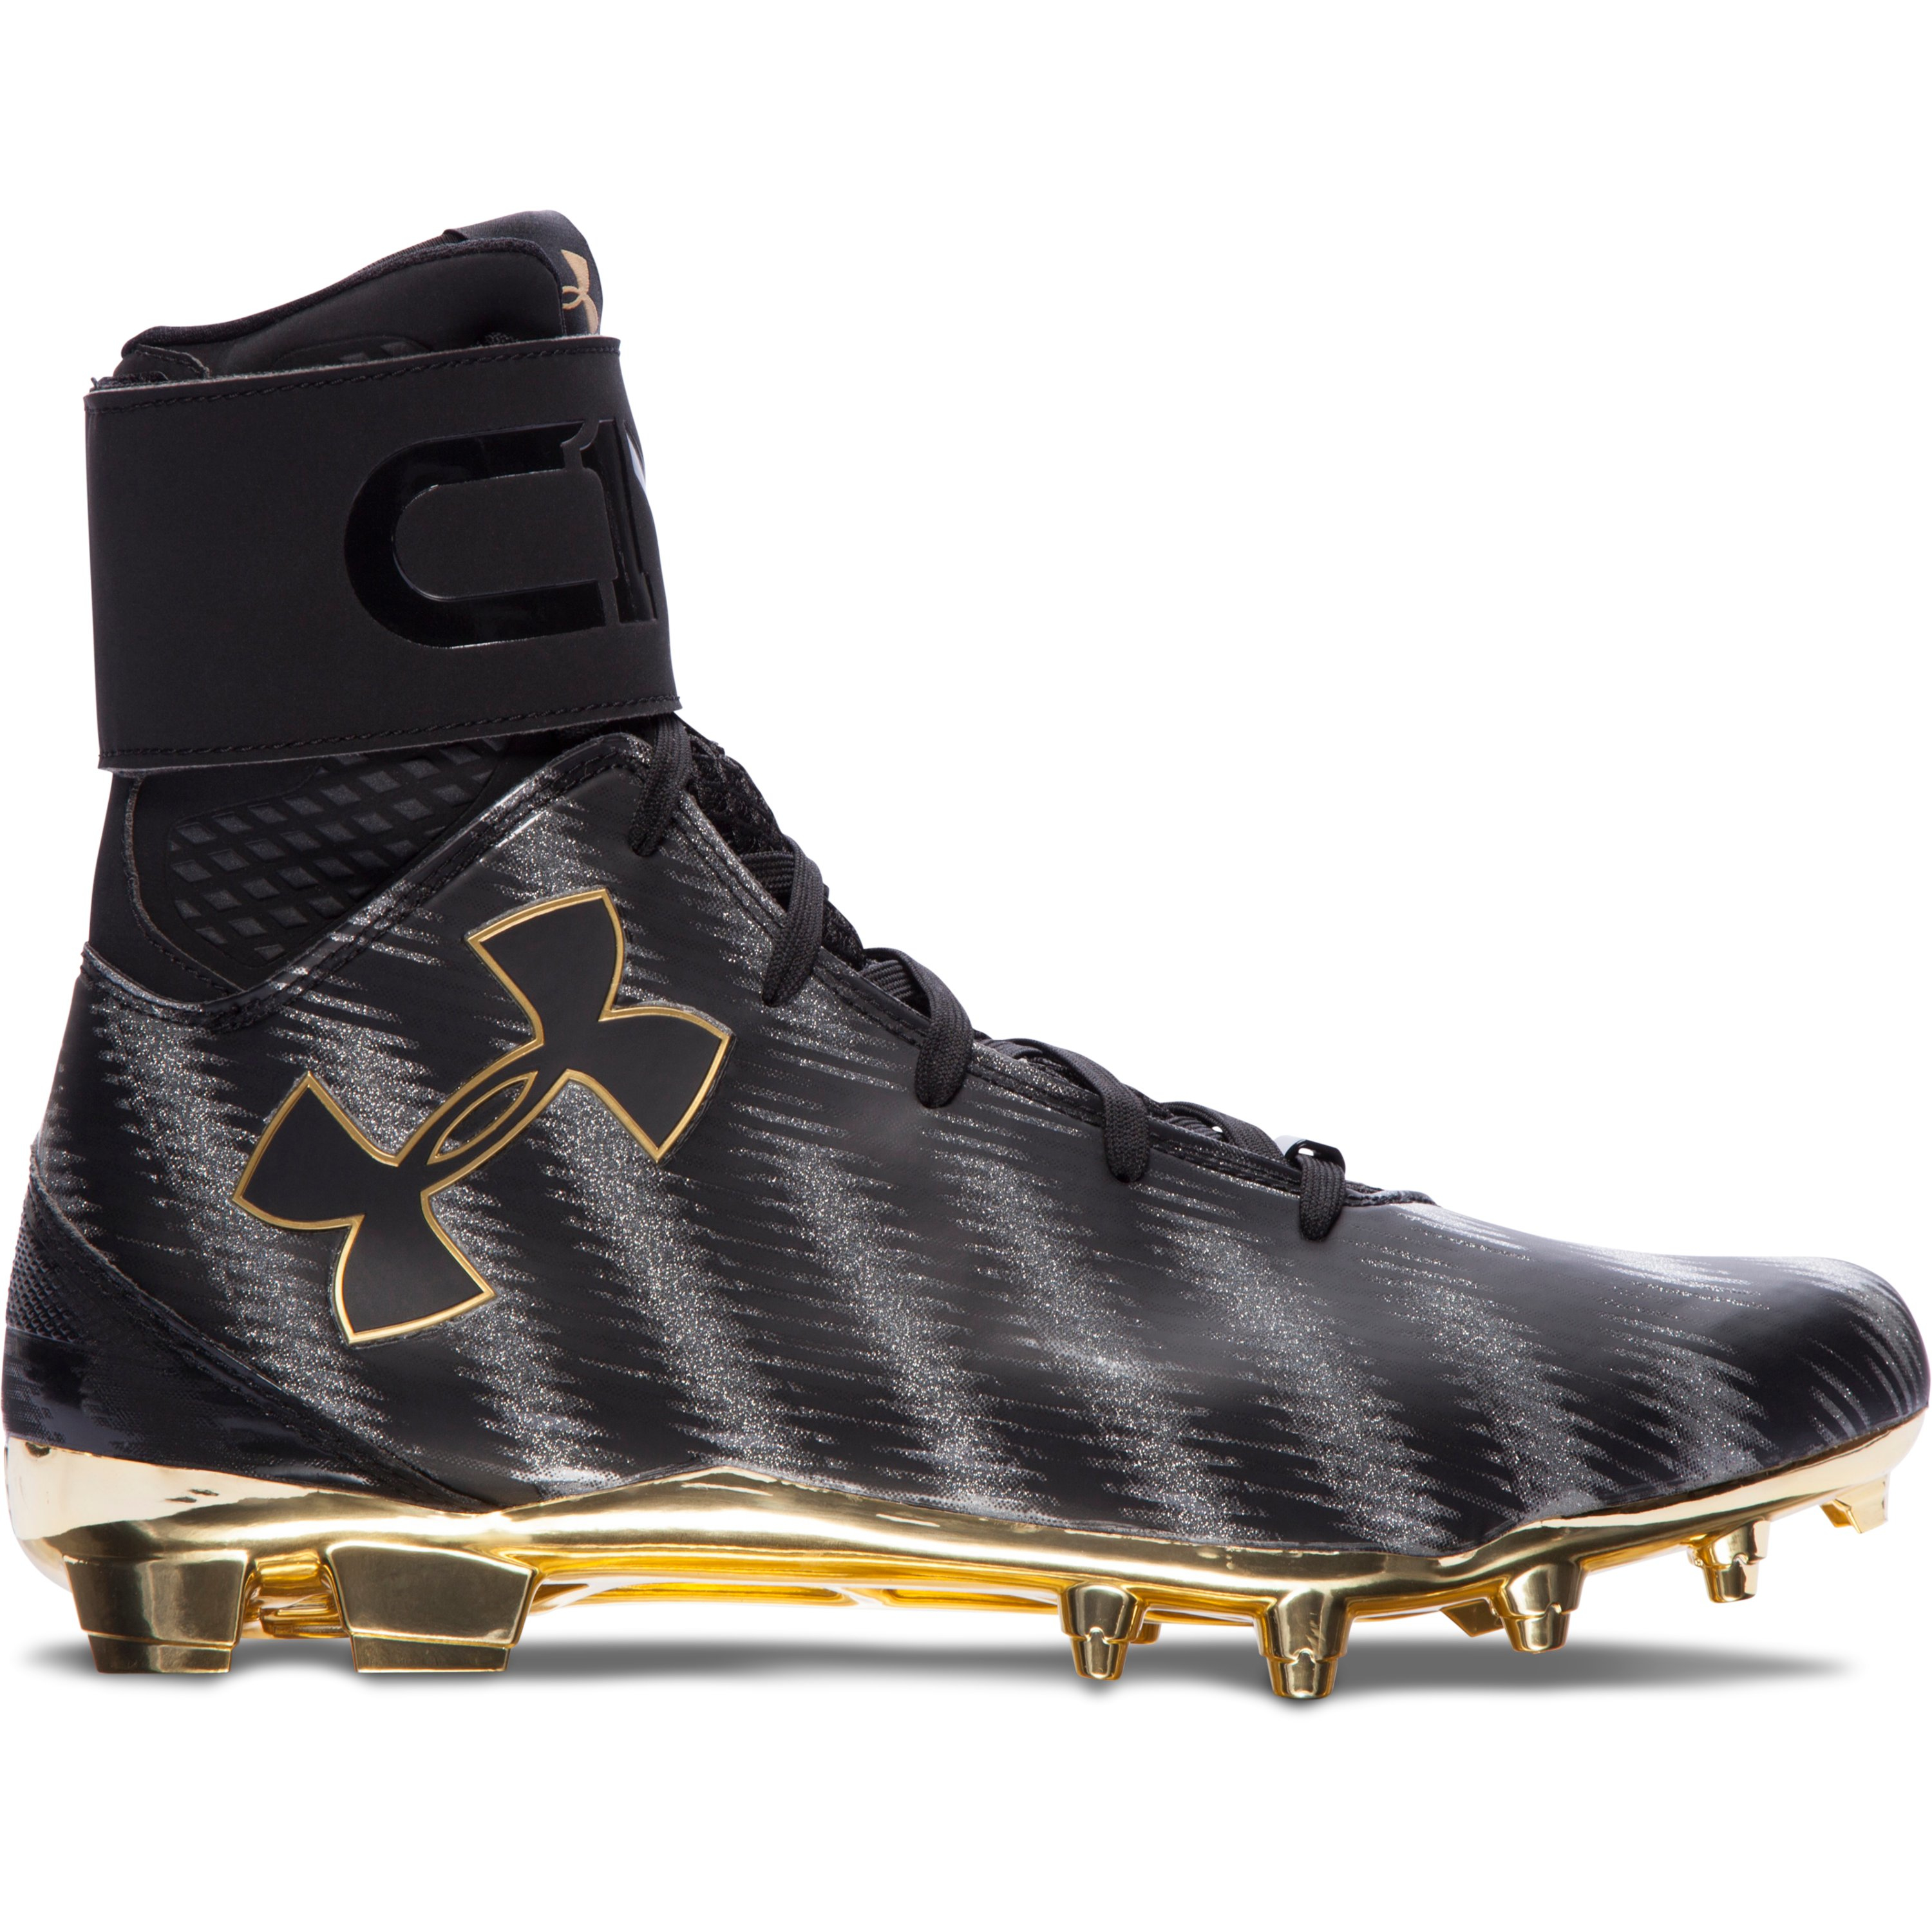 Under Armour Synthetic Men's Ua C1n Mc Football Cleats – Limited ...